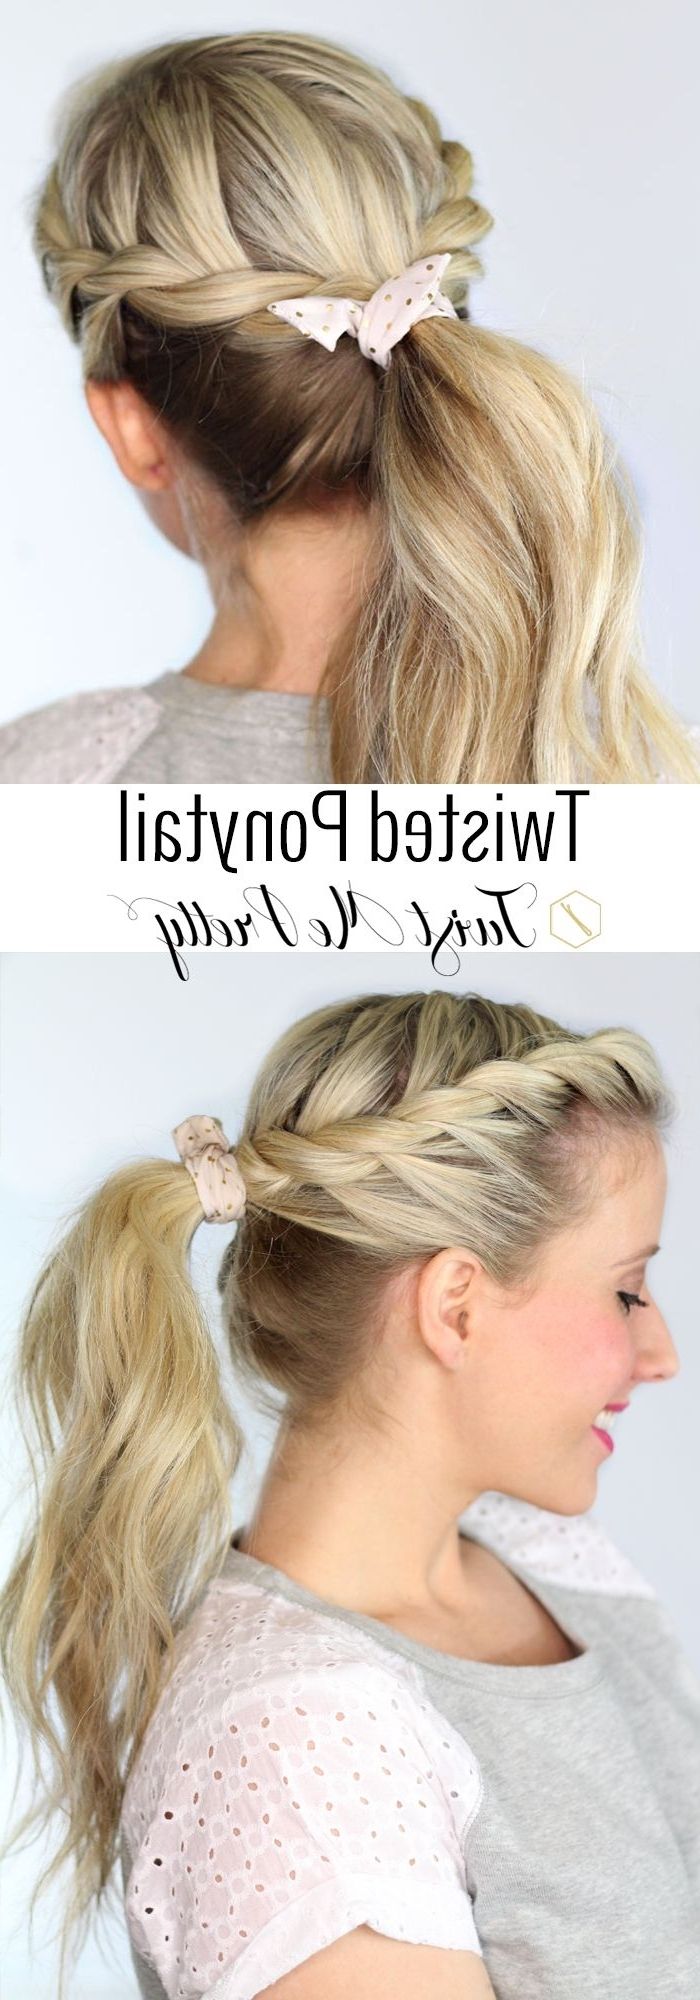 10 Twisted Ponytail Tutorials – Pretty Designs Within Favorite Blonde Braided And Twisted Ponytails (View 12 of 20)